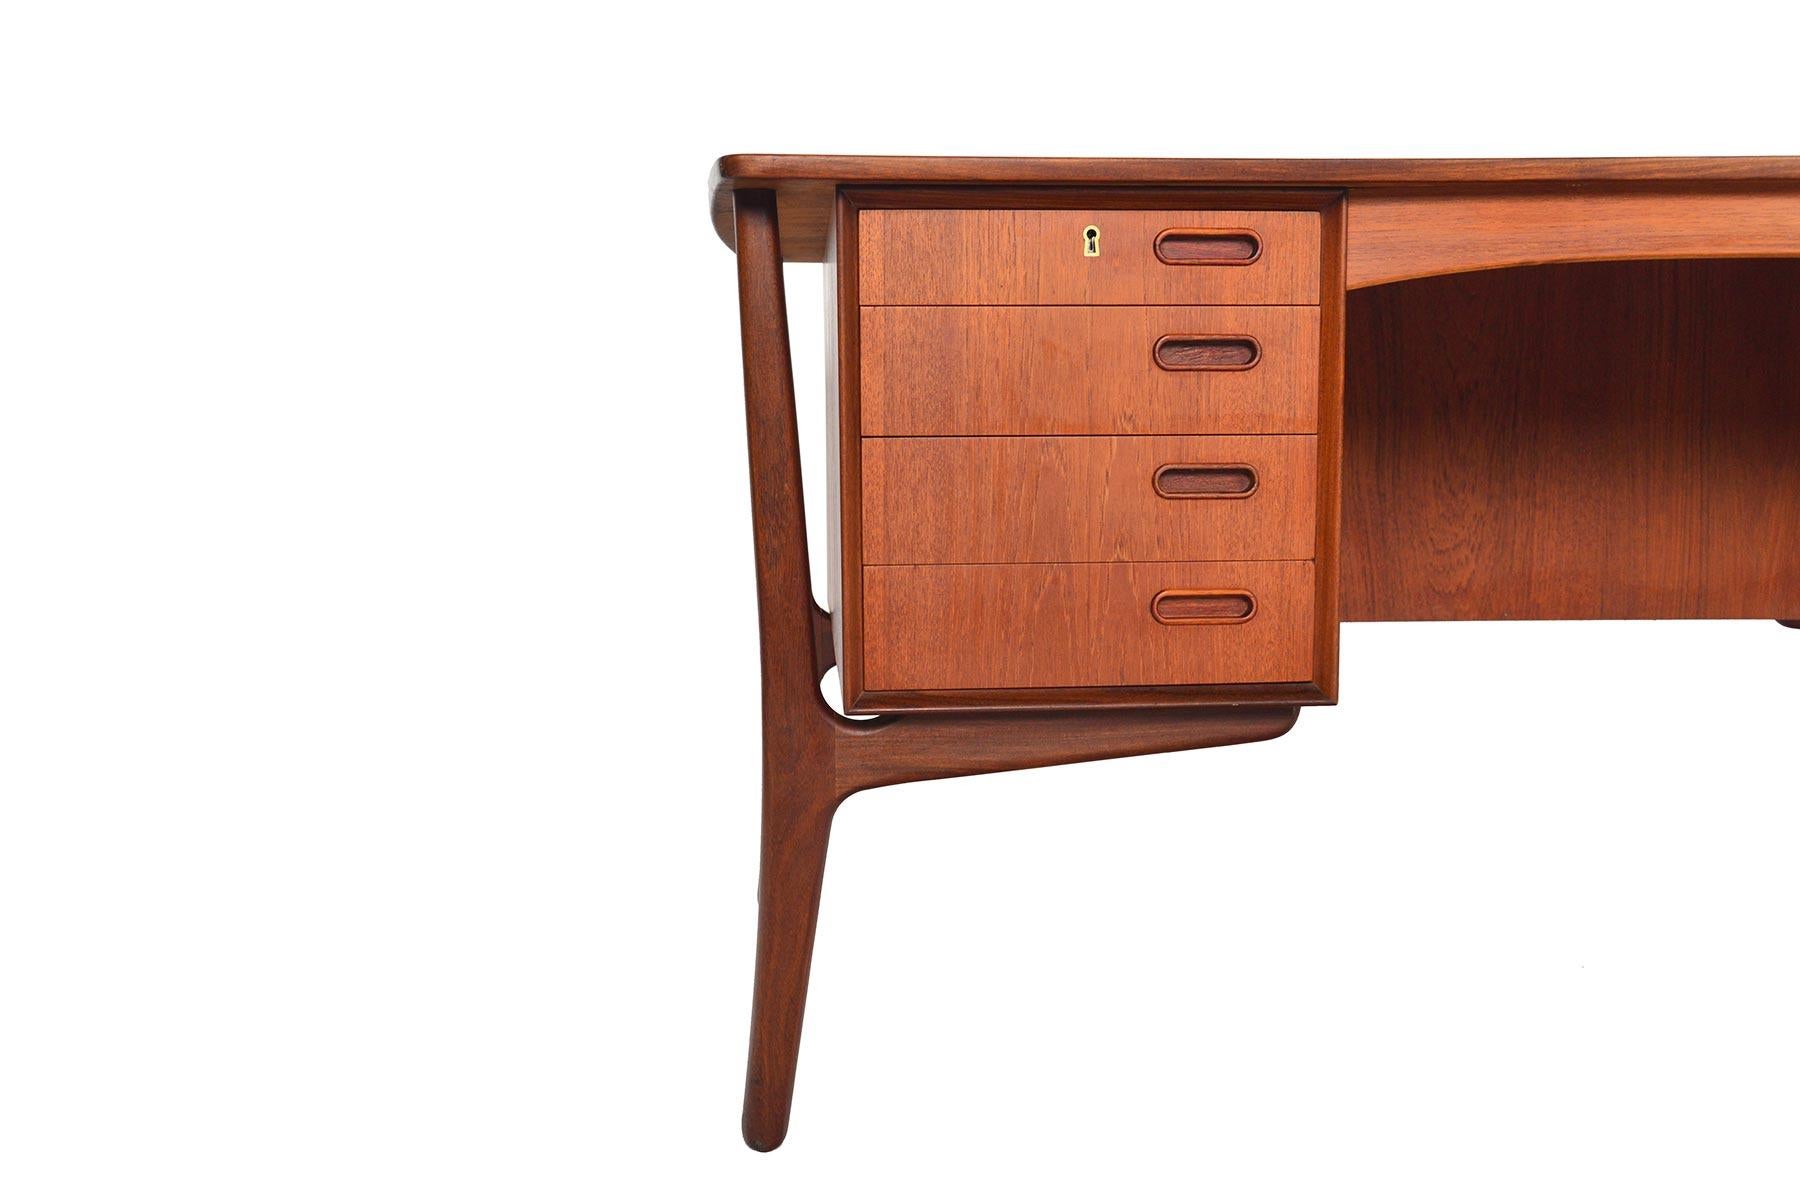 A staple of Scandinavian design, this teak executive desk was designed by Svend Madsen as Model 20 for H.P. Hansen in the 1960s. The top plate offers a subtle bowed design with an exterior raised. Exterior mounted legs not only support the table